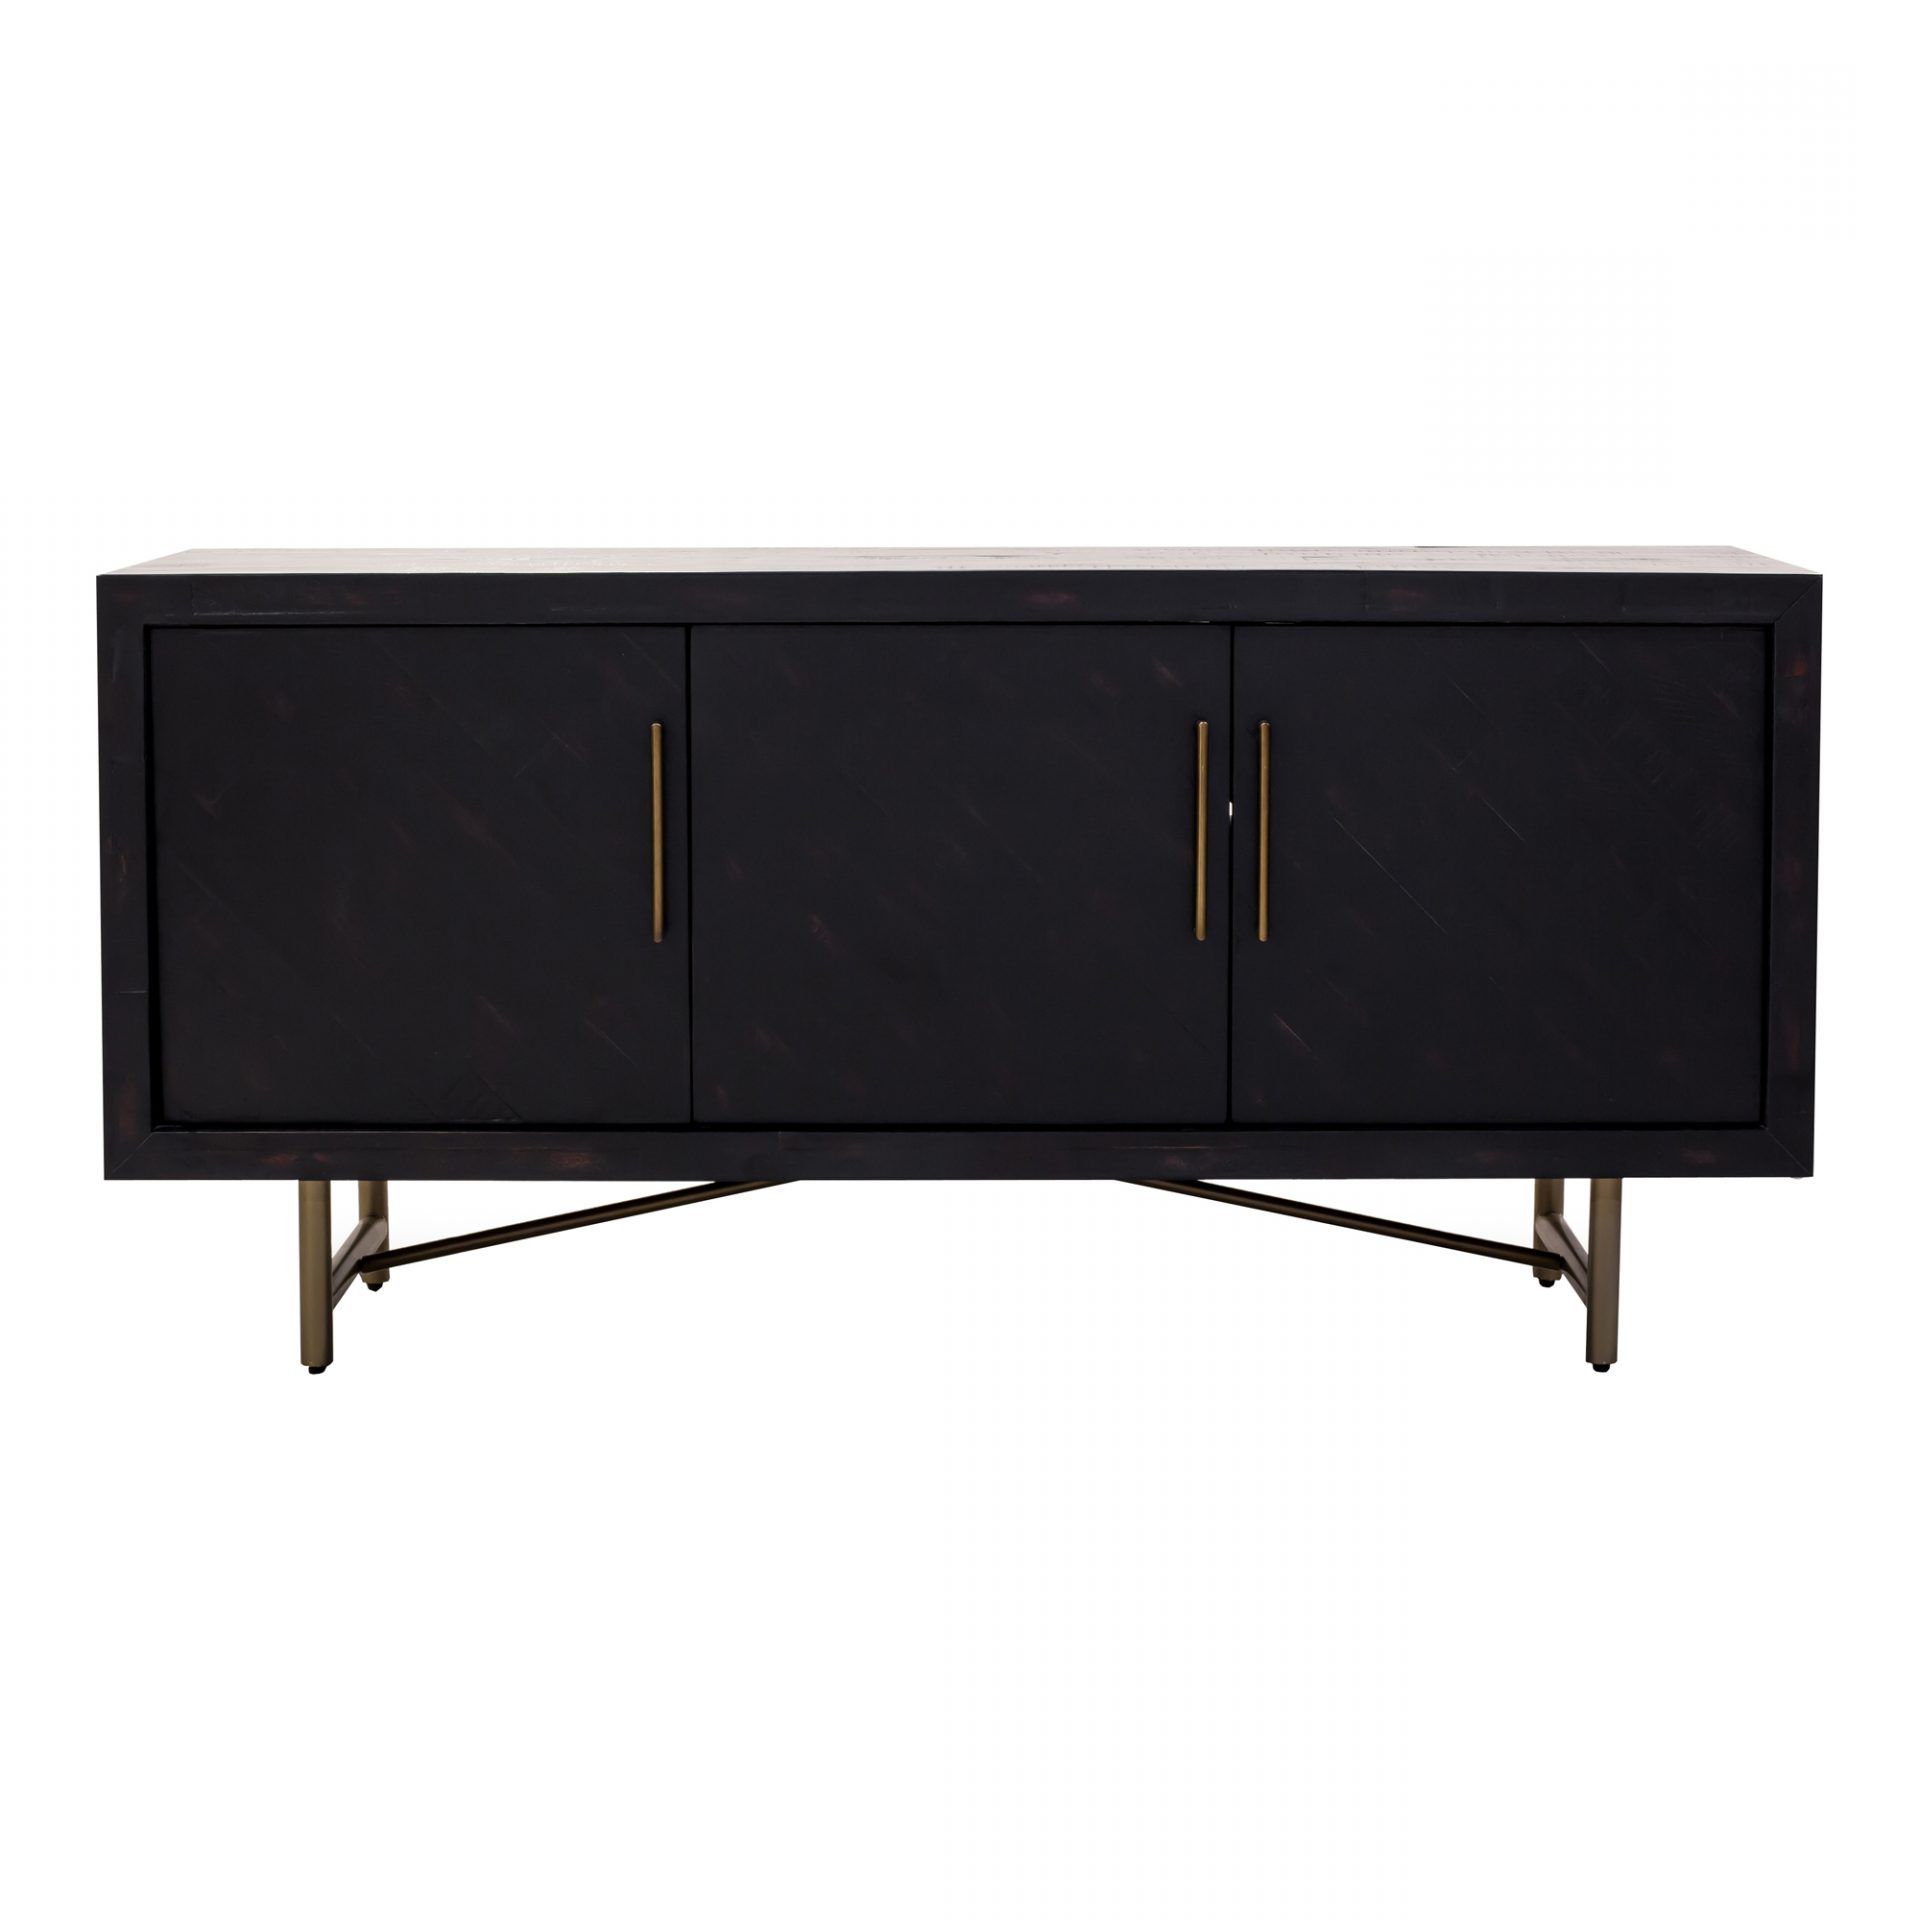 Sideboards & Storage | Categories | Moe's Wholesale Inside Solid Wood Contemporary Sideboards Buffets (View 13 of 20)